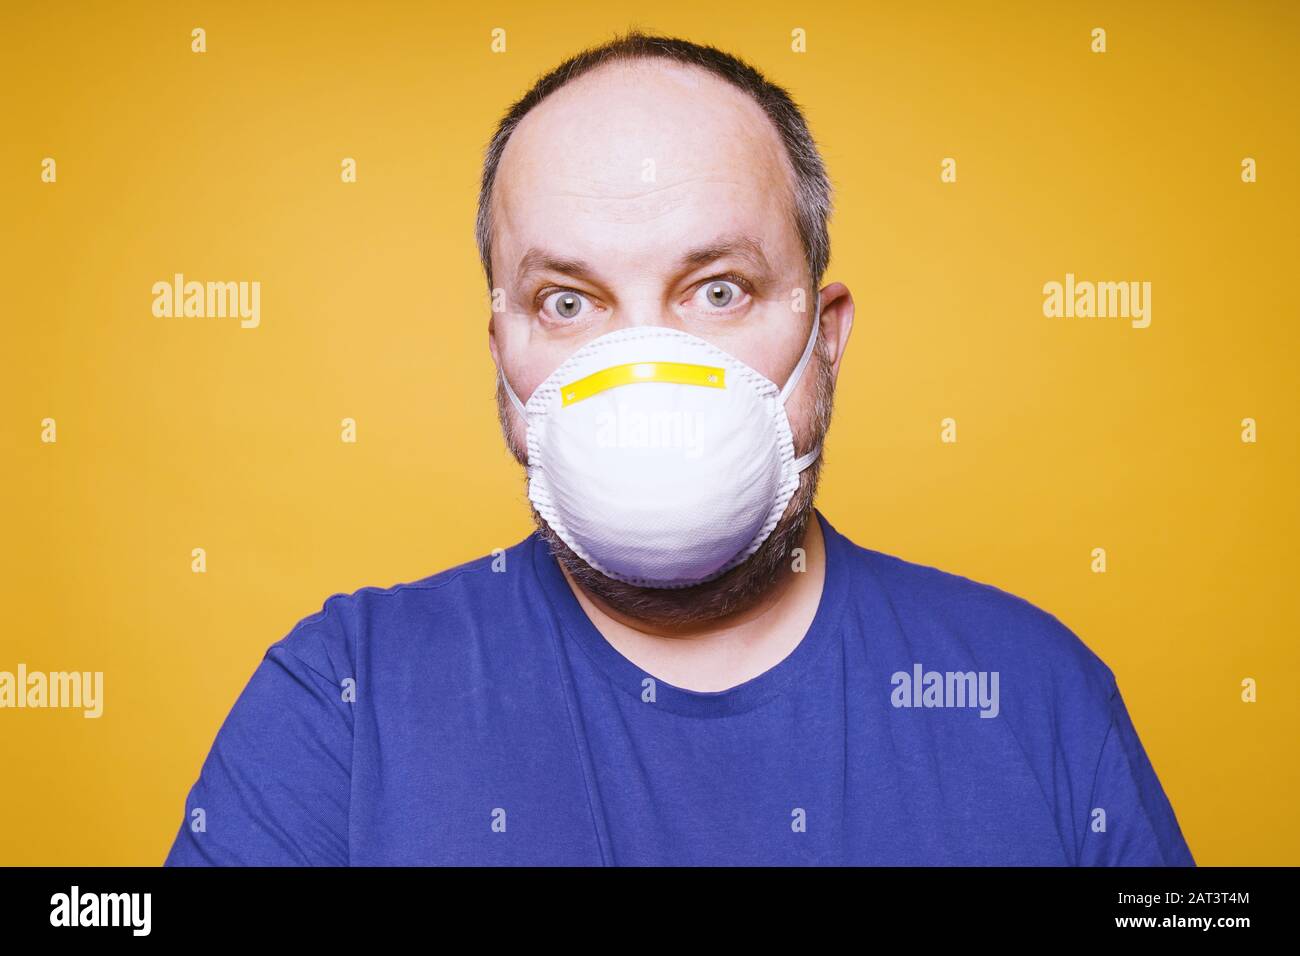 man with face mask and panic in his eyes - corona virus outbreak hysteria concept Stock Photo